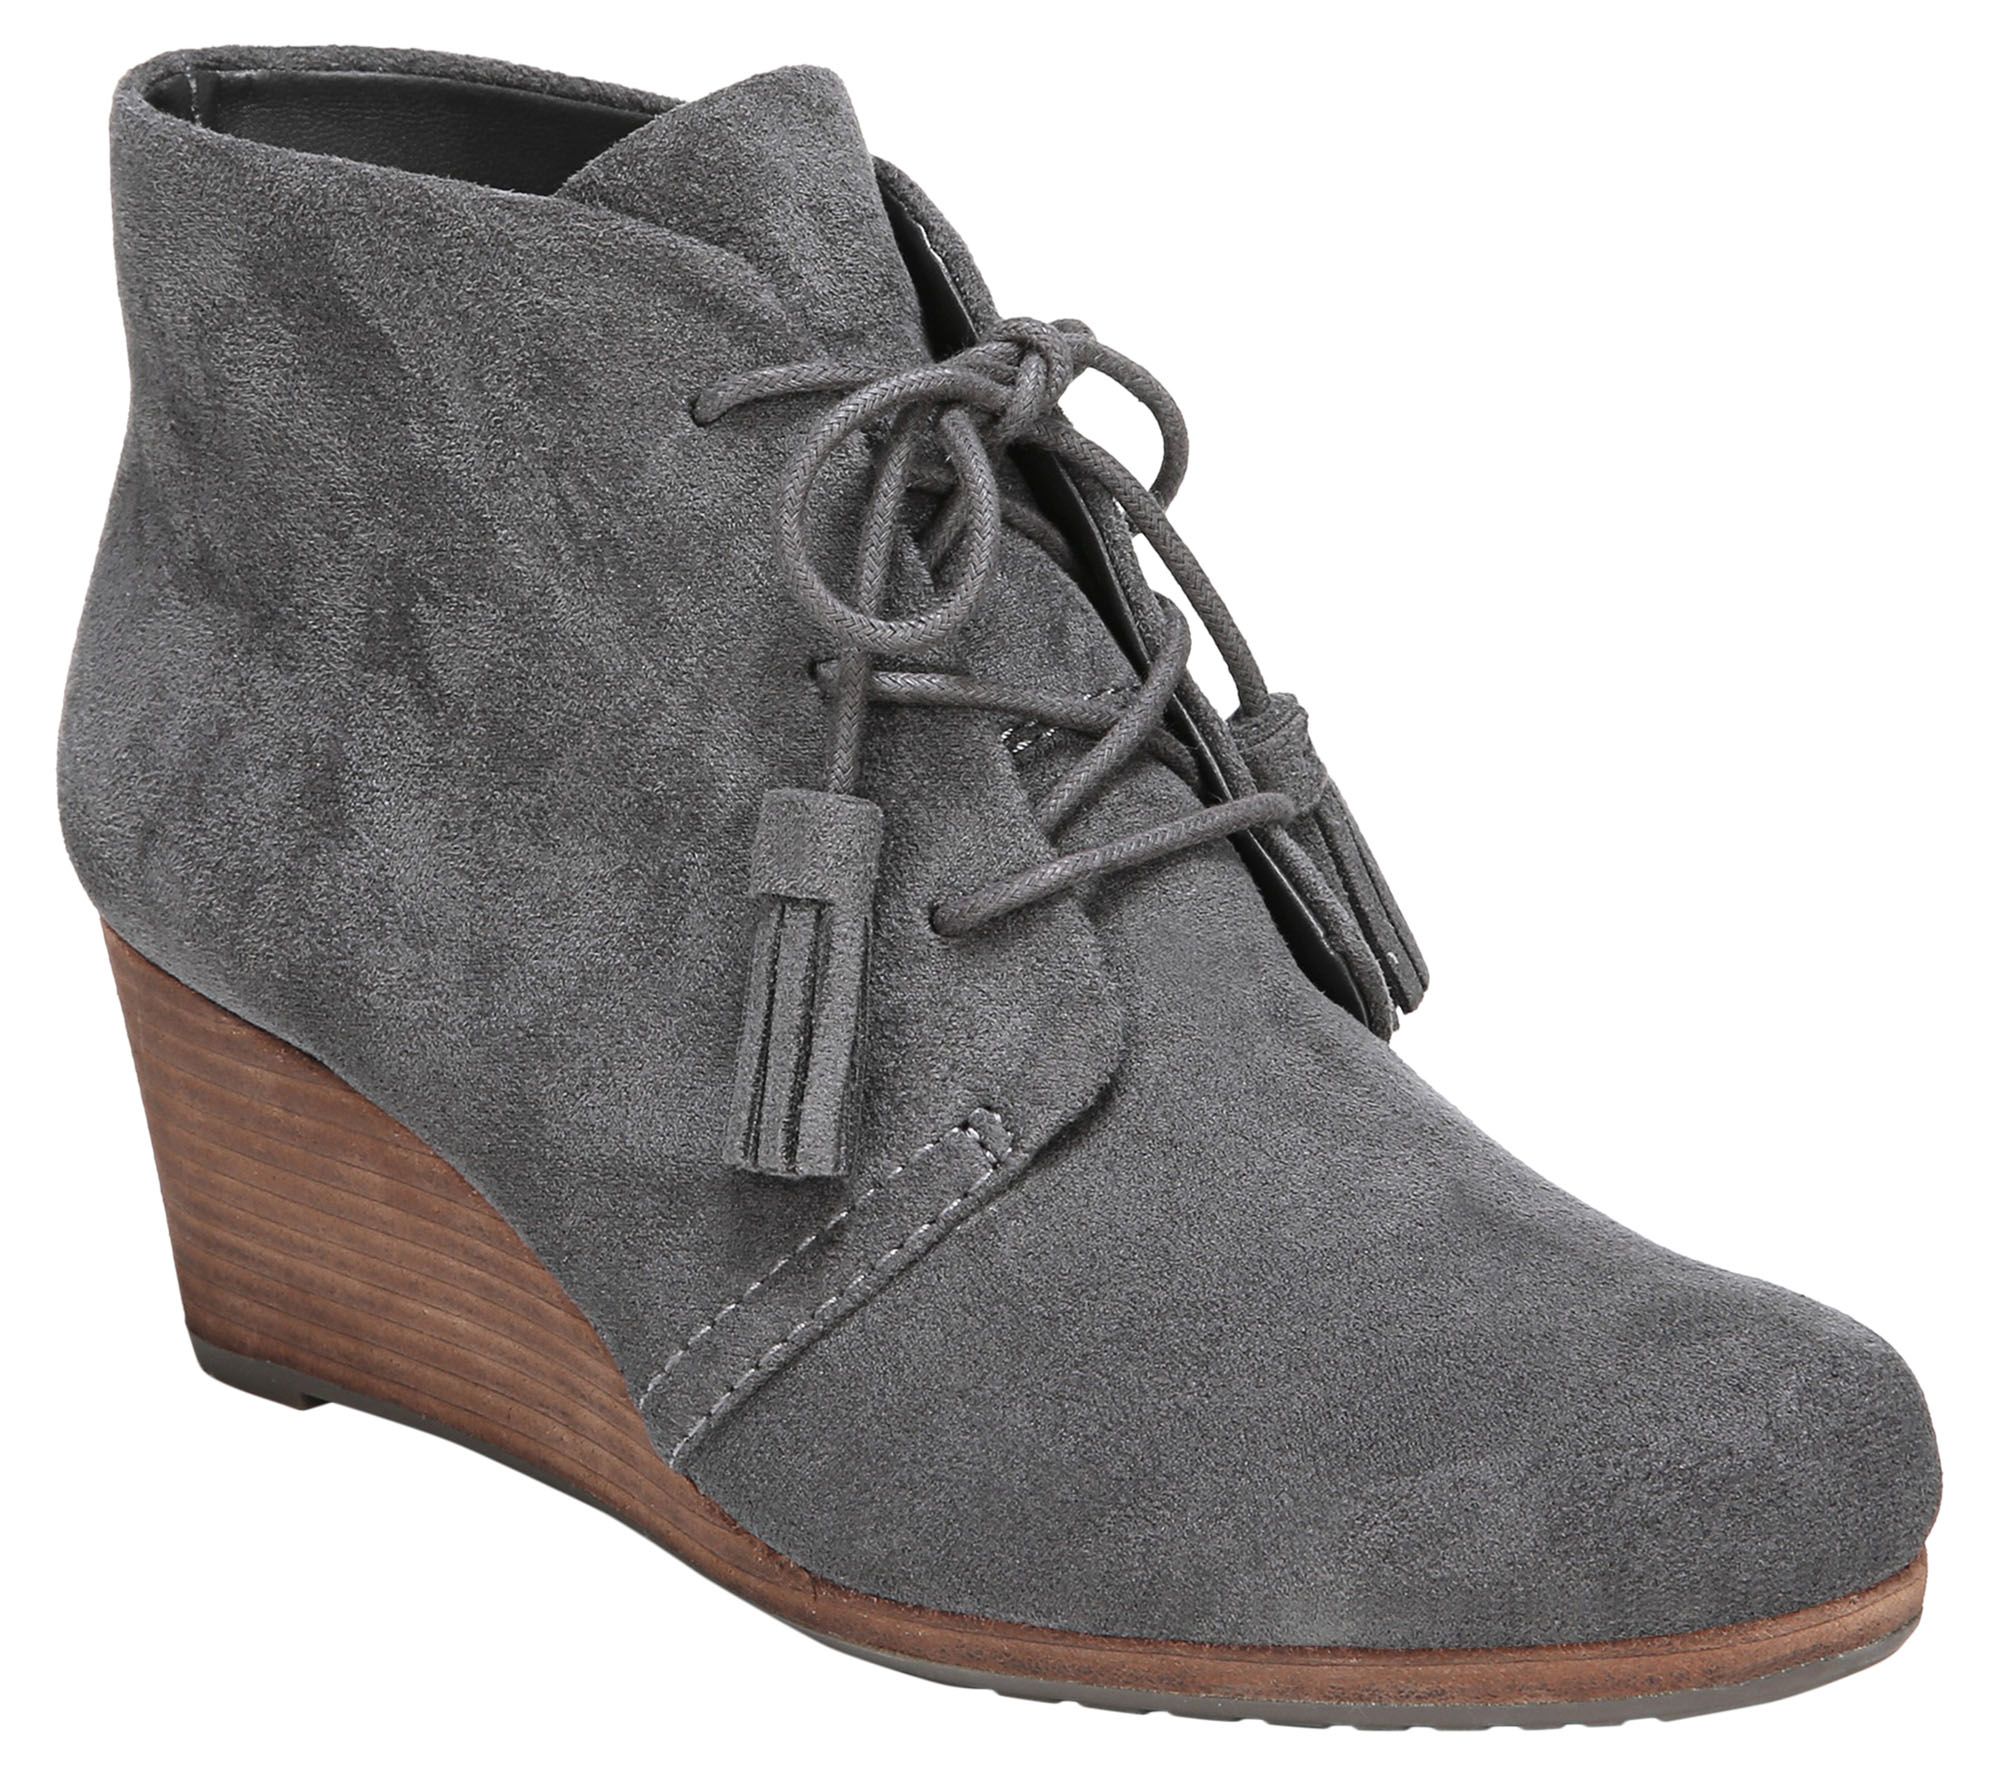 wedge booties cheap